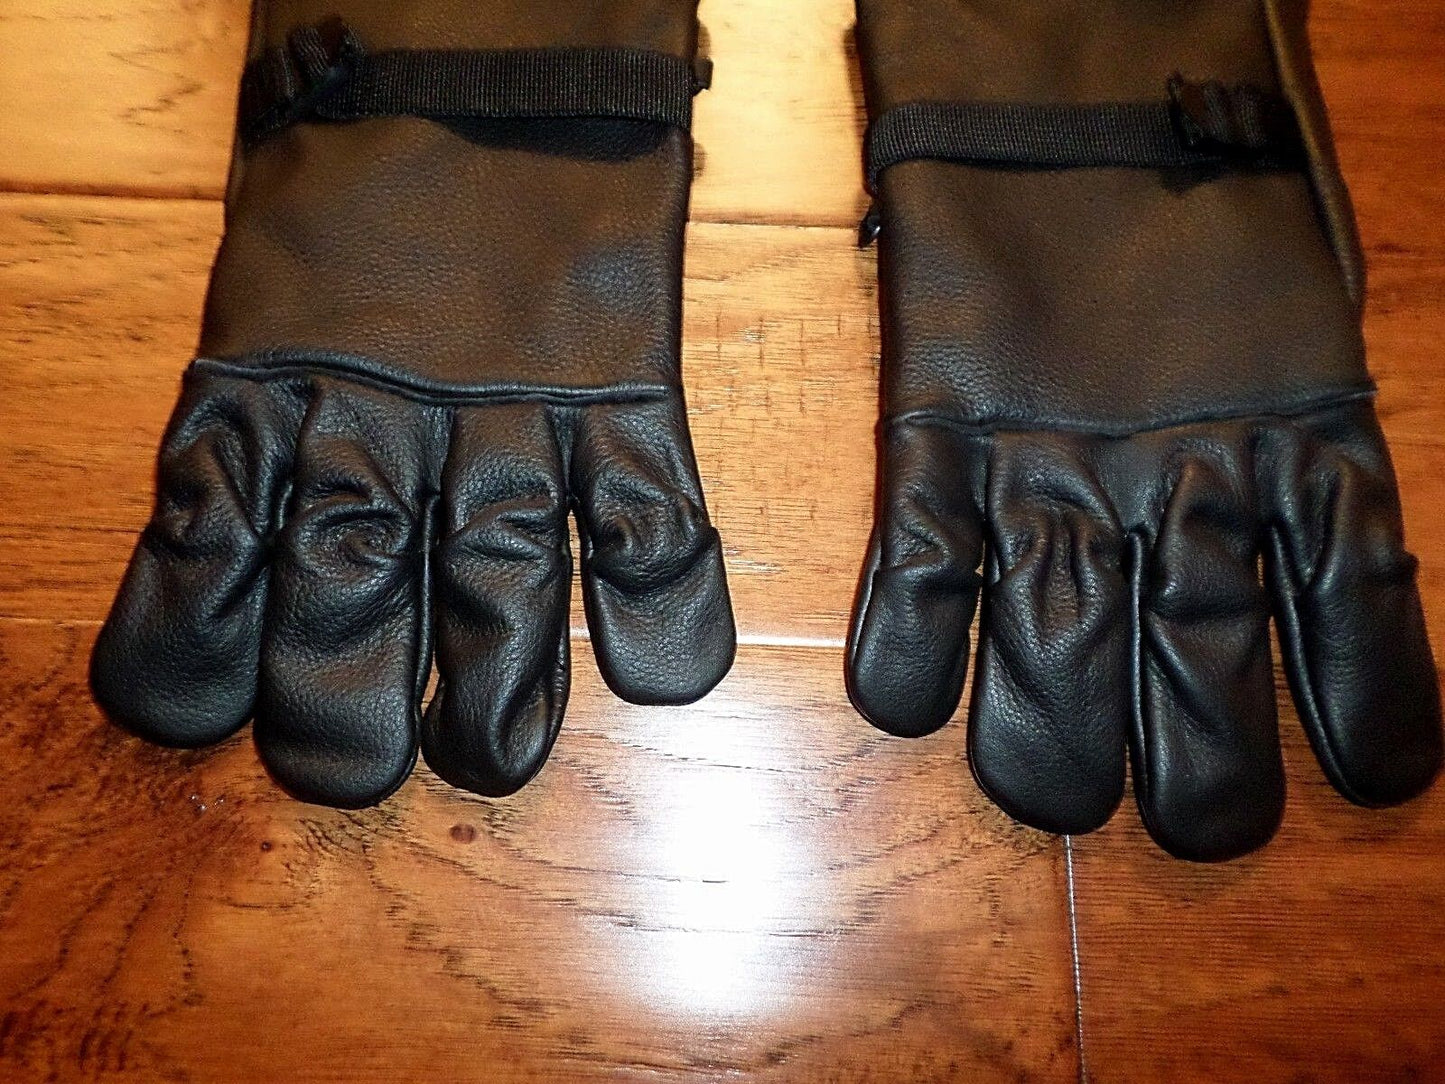 U.S MILITARY STYLE D-3A LEATHER GLOVES COLD WEATHER SIZE 6 X- LARGE W/LINER